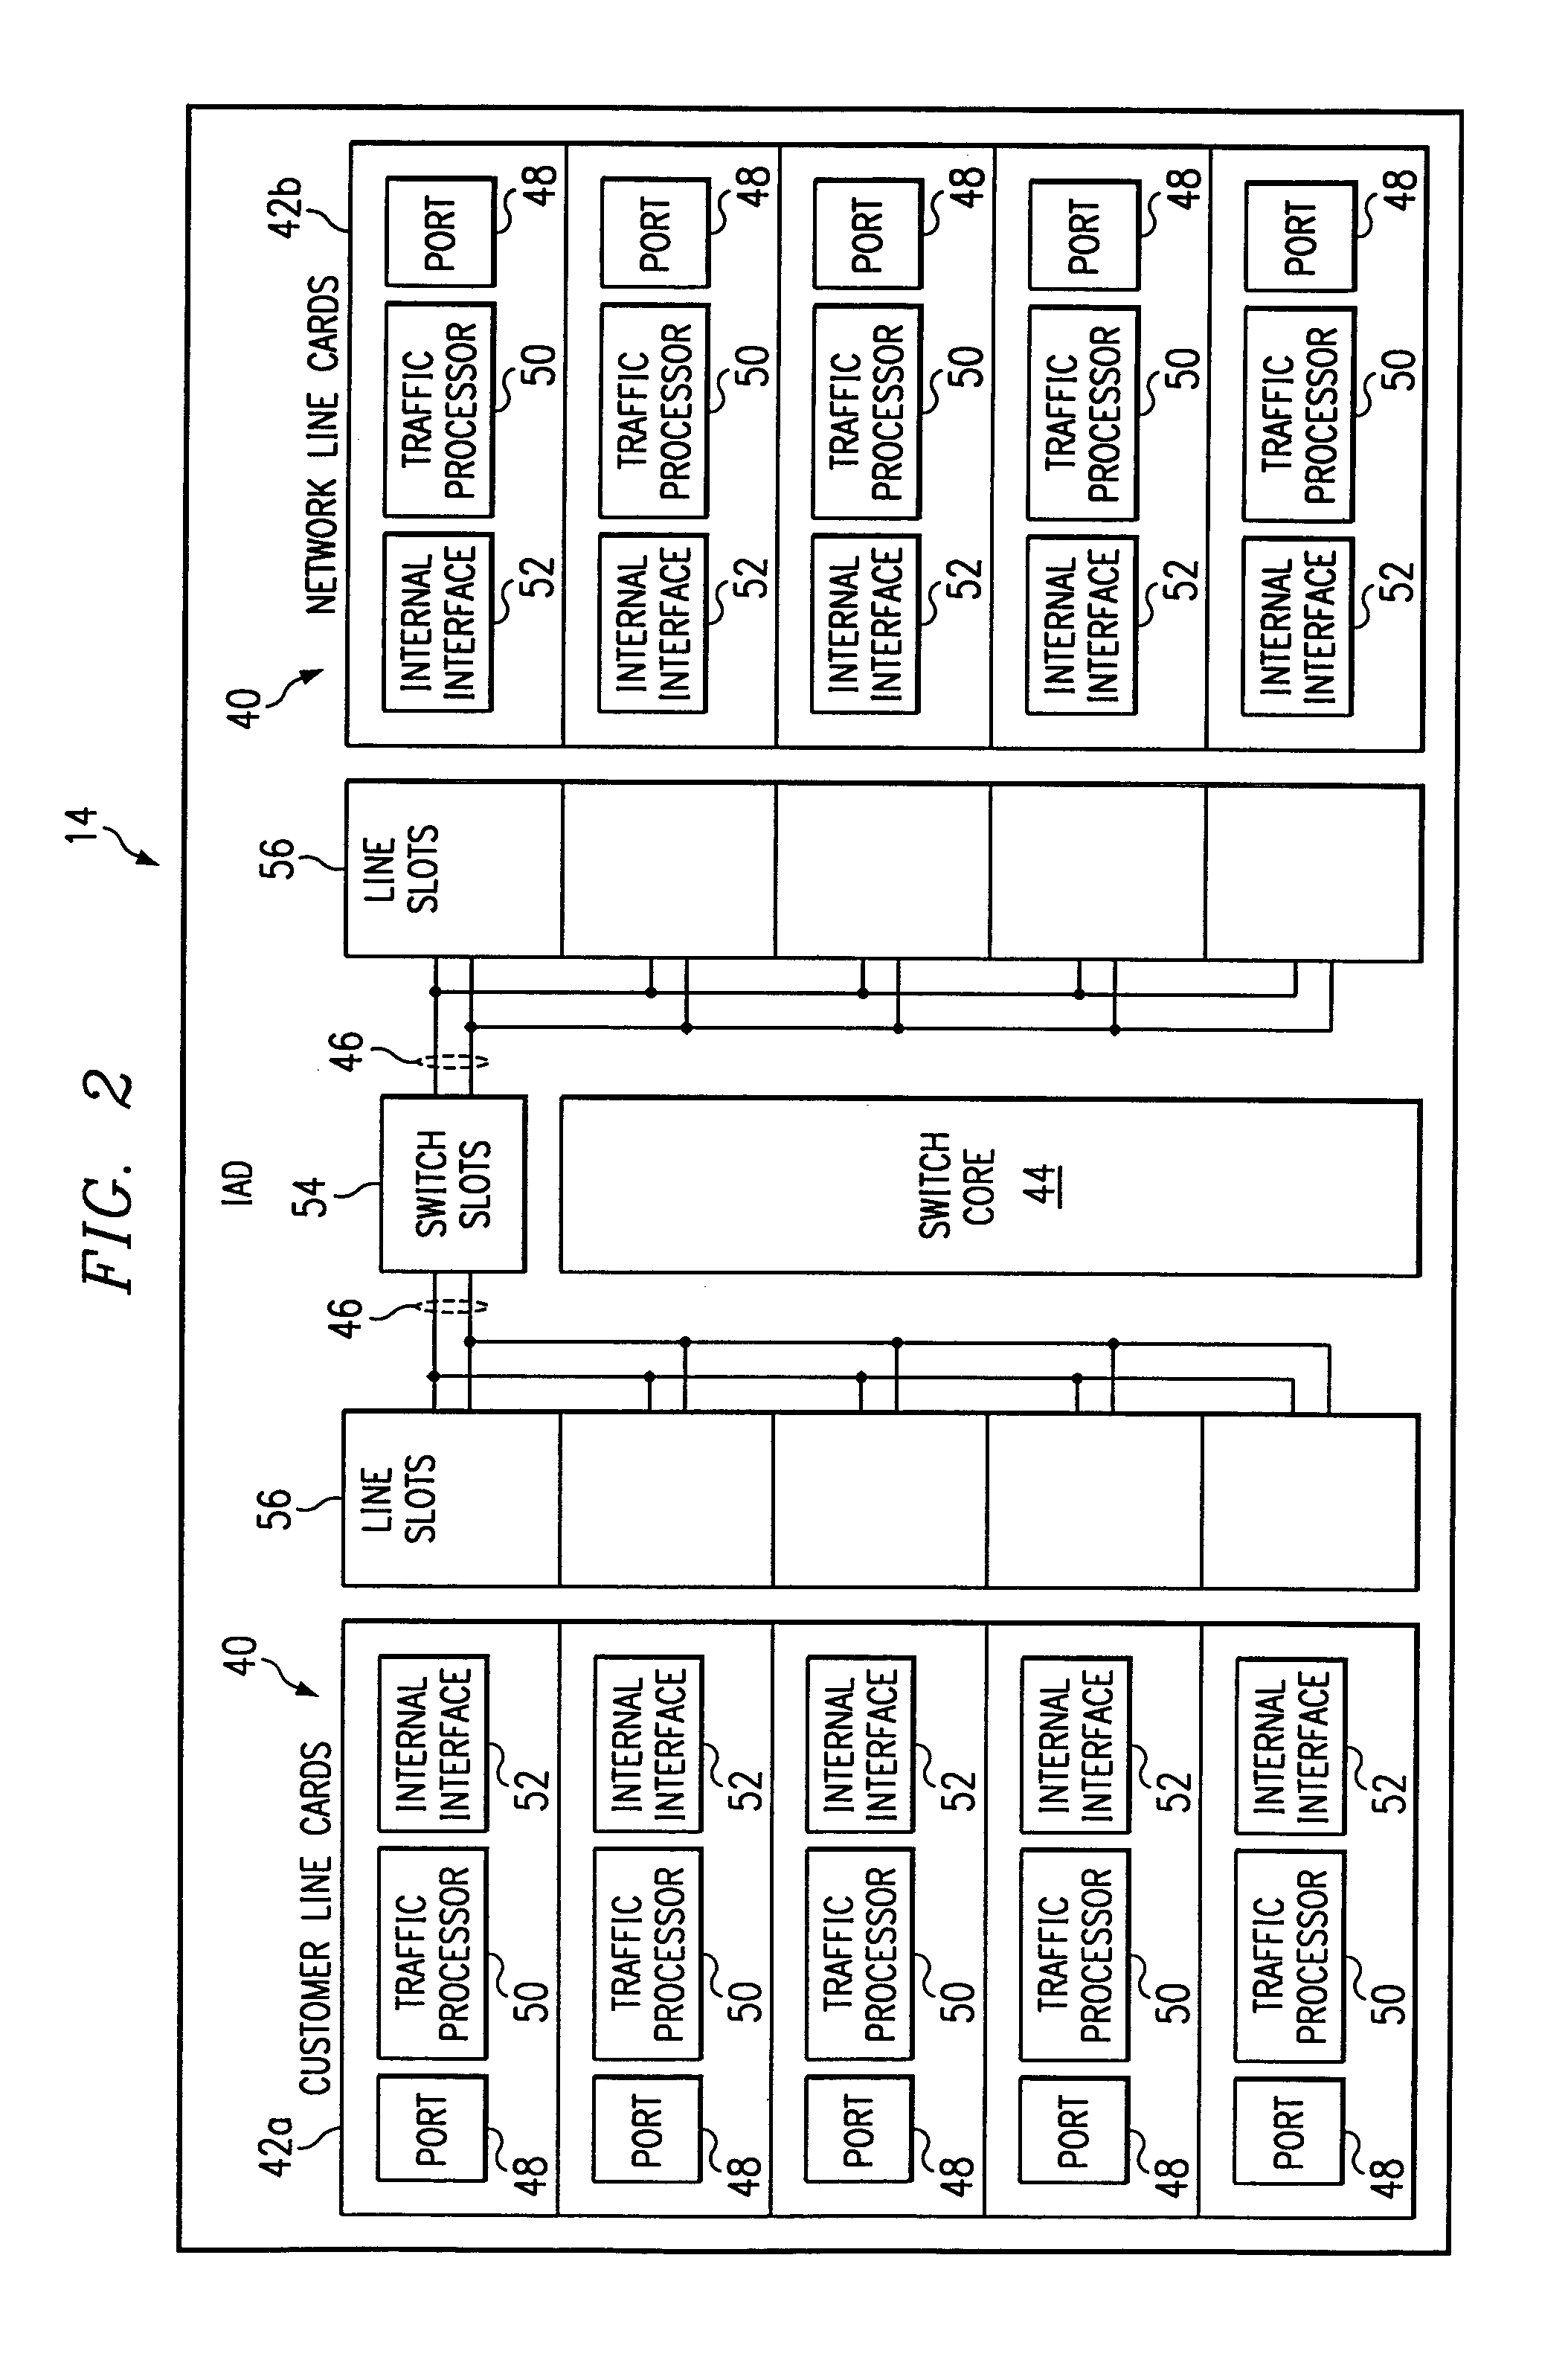 Asynchronous transfer mode (ATM) switch and method for switching ATM traffic